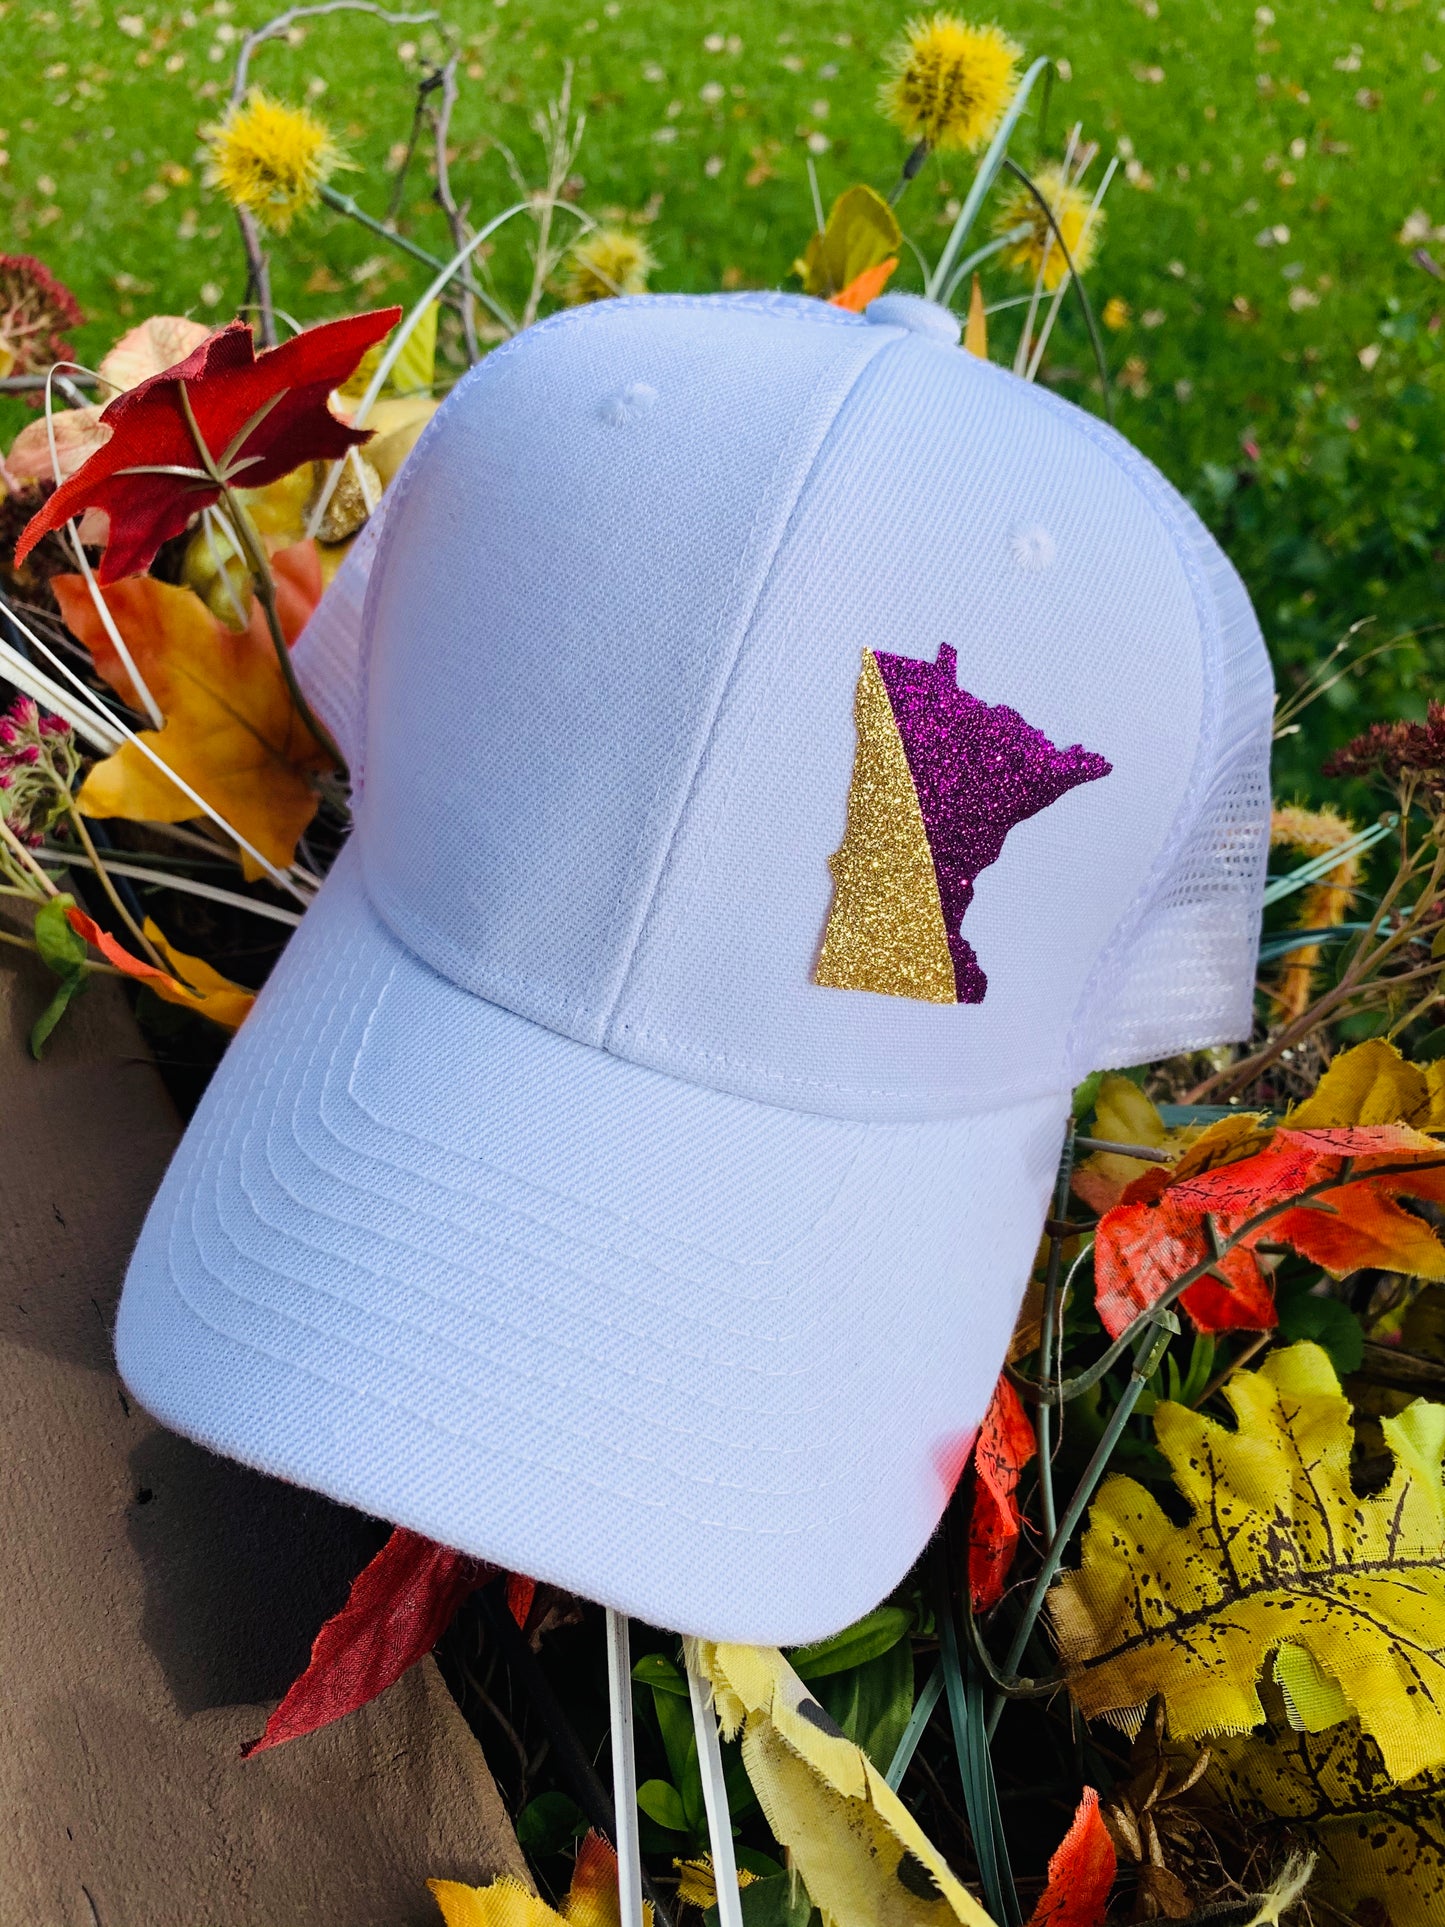 Hats { Minnesota Vikings } White structured hat with mesh back and purple and gold glitter state of Minnesota. Adjustable snap back cap. Unisex. - Stacy's Pink Martini Boutique